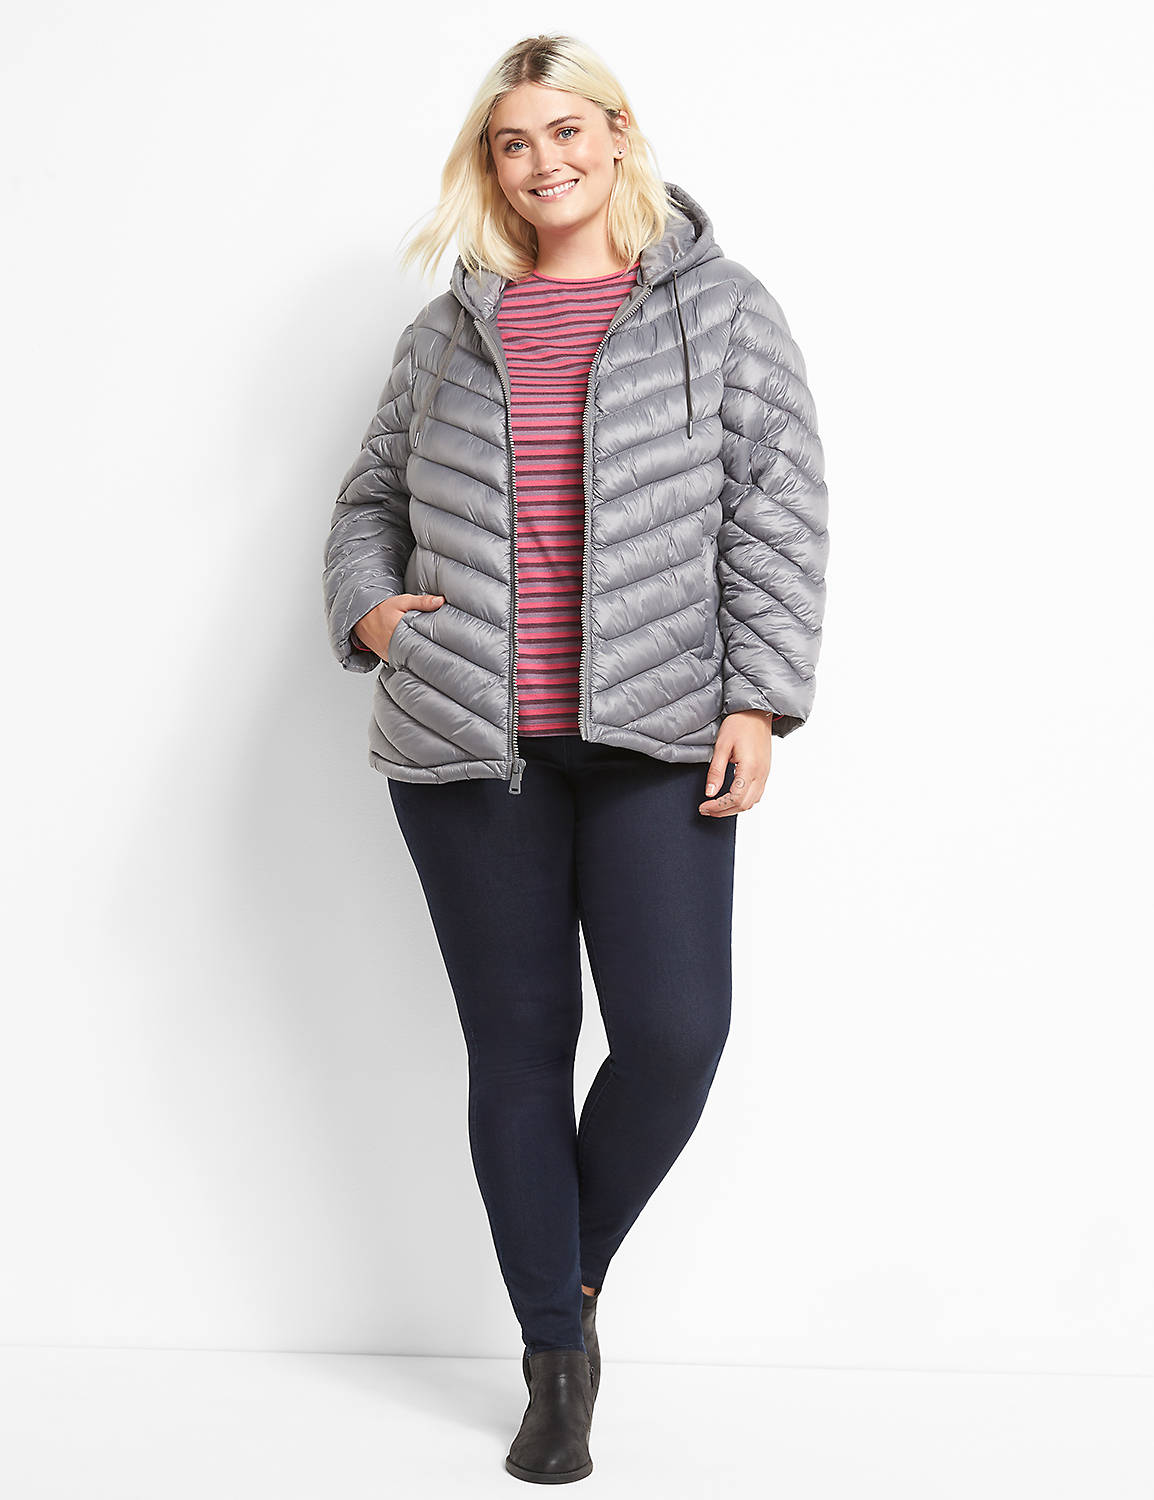 Packable Puffer 1123314 Product Image 3